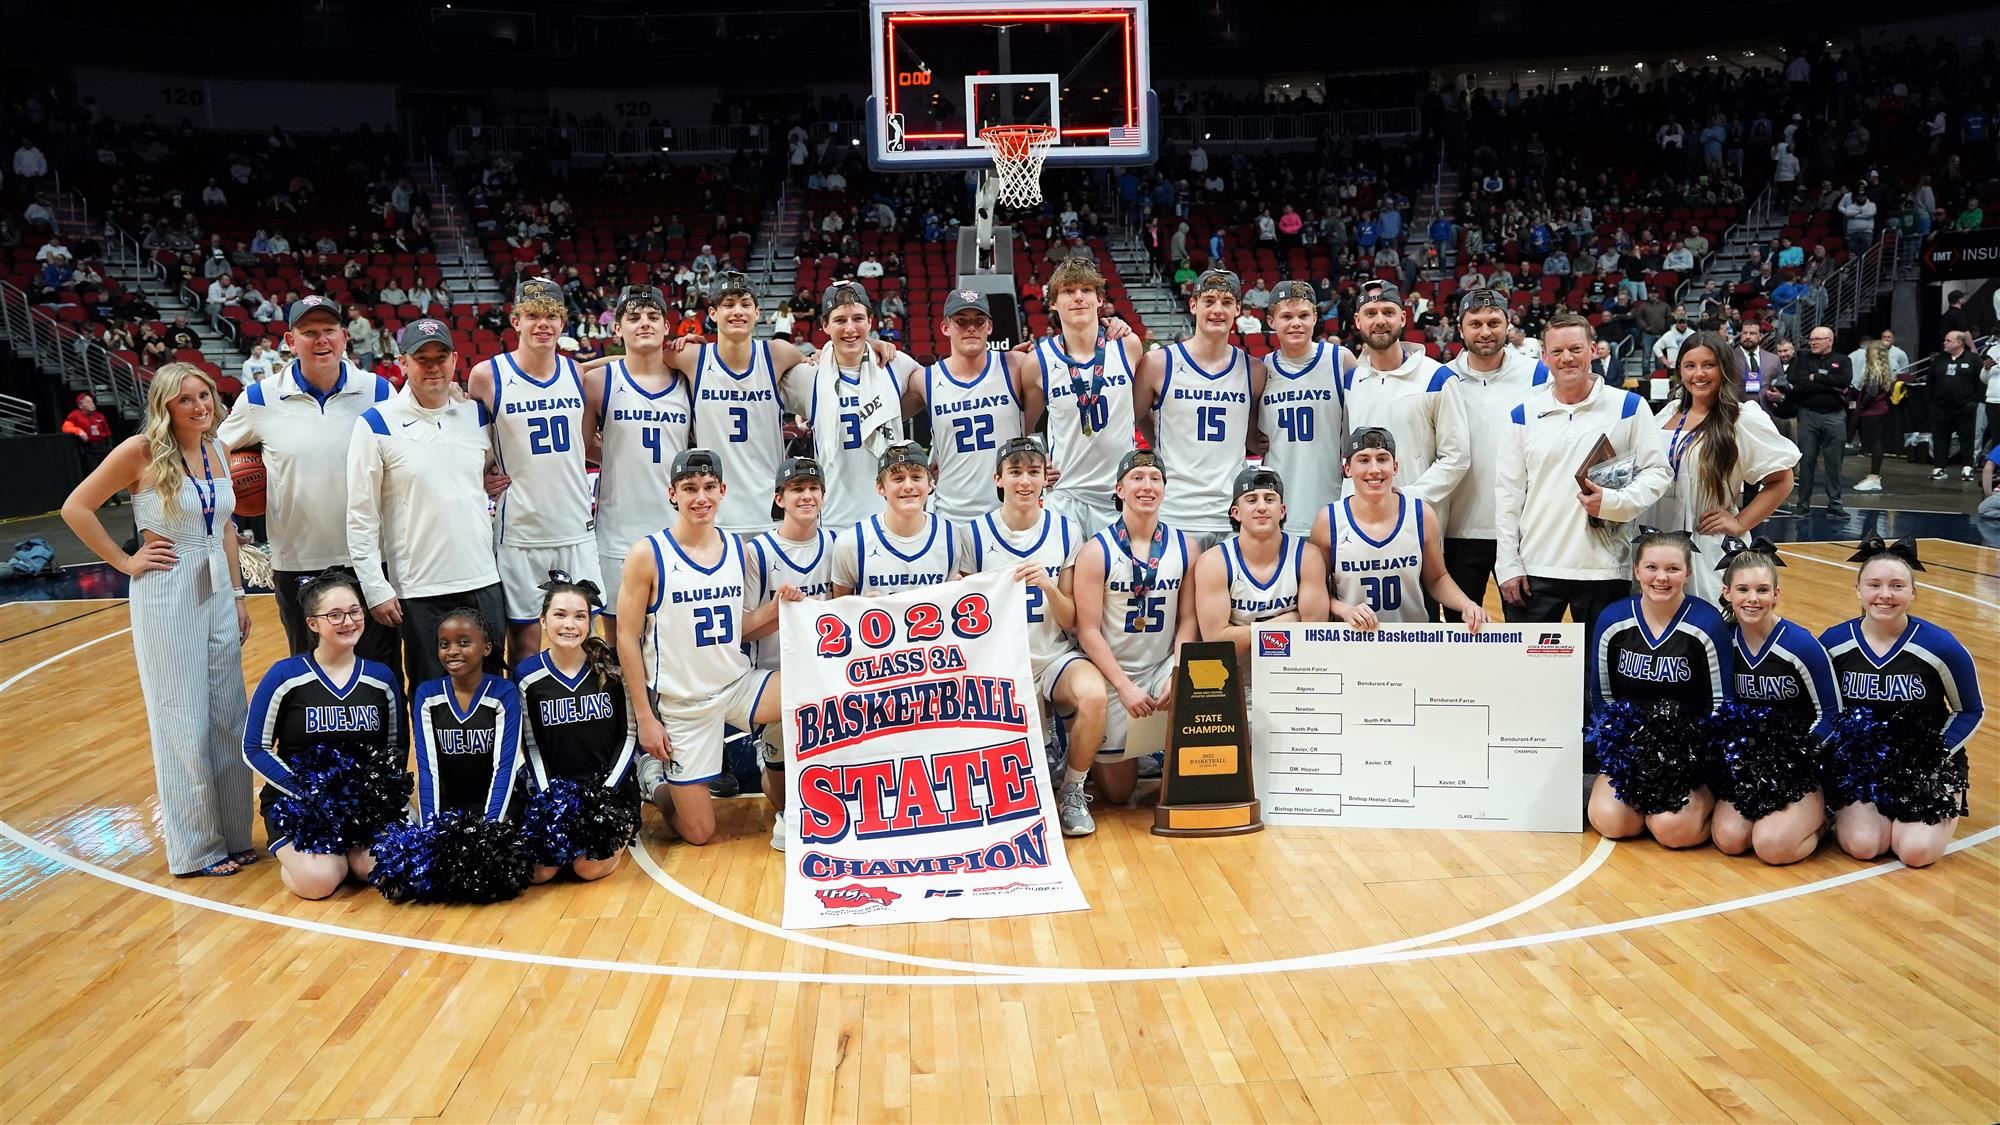 Team photo of players, coaches, cheerleaders, and managers with champion banner and trophy